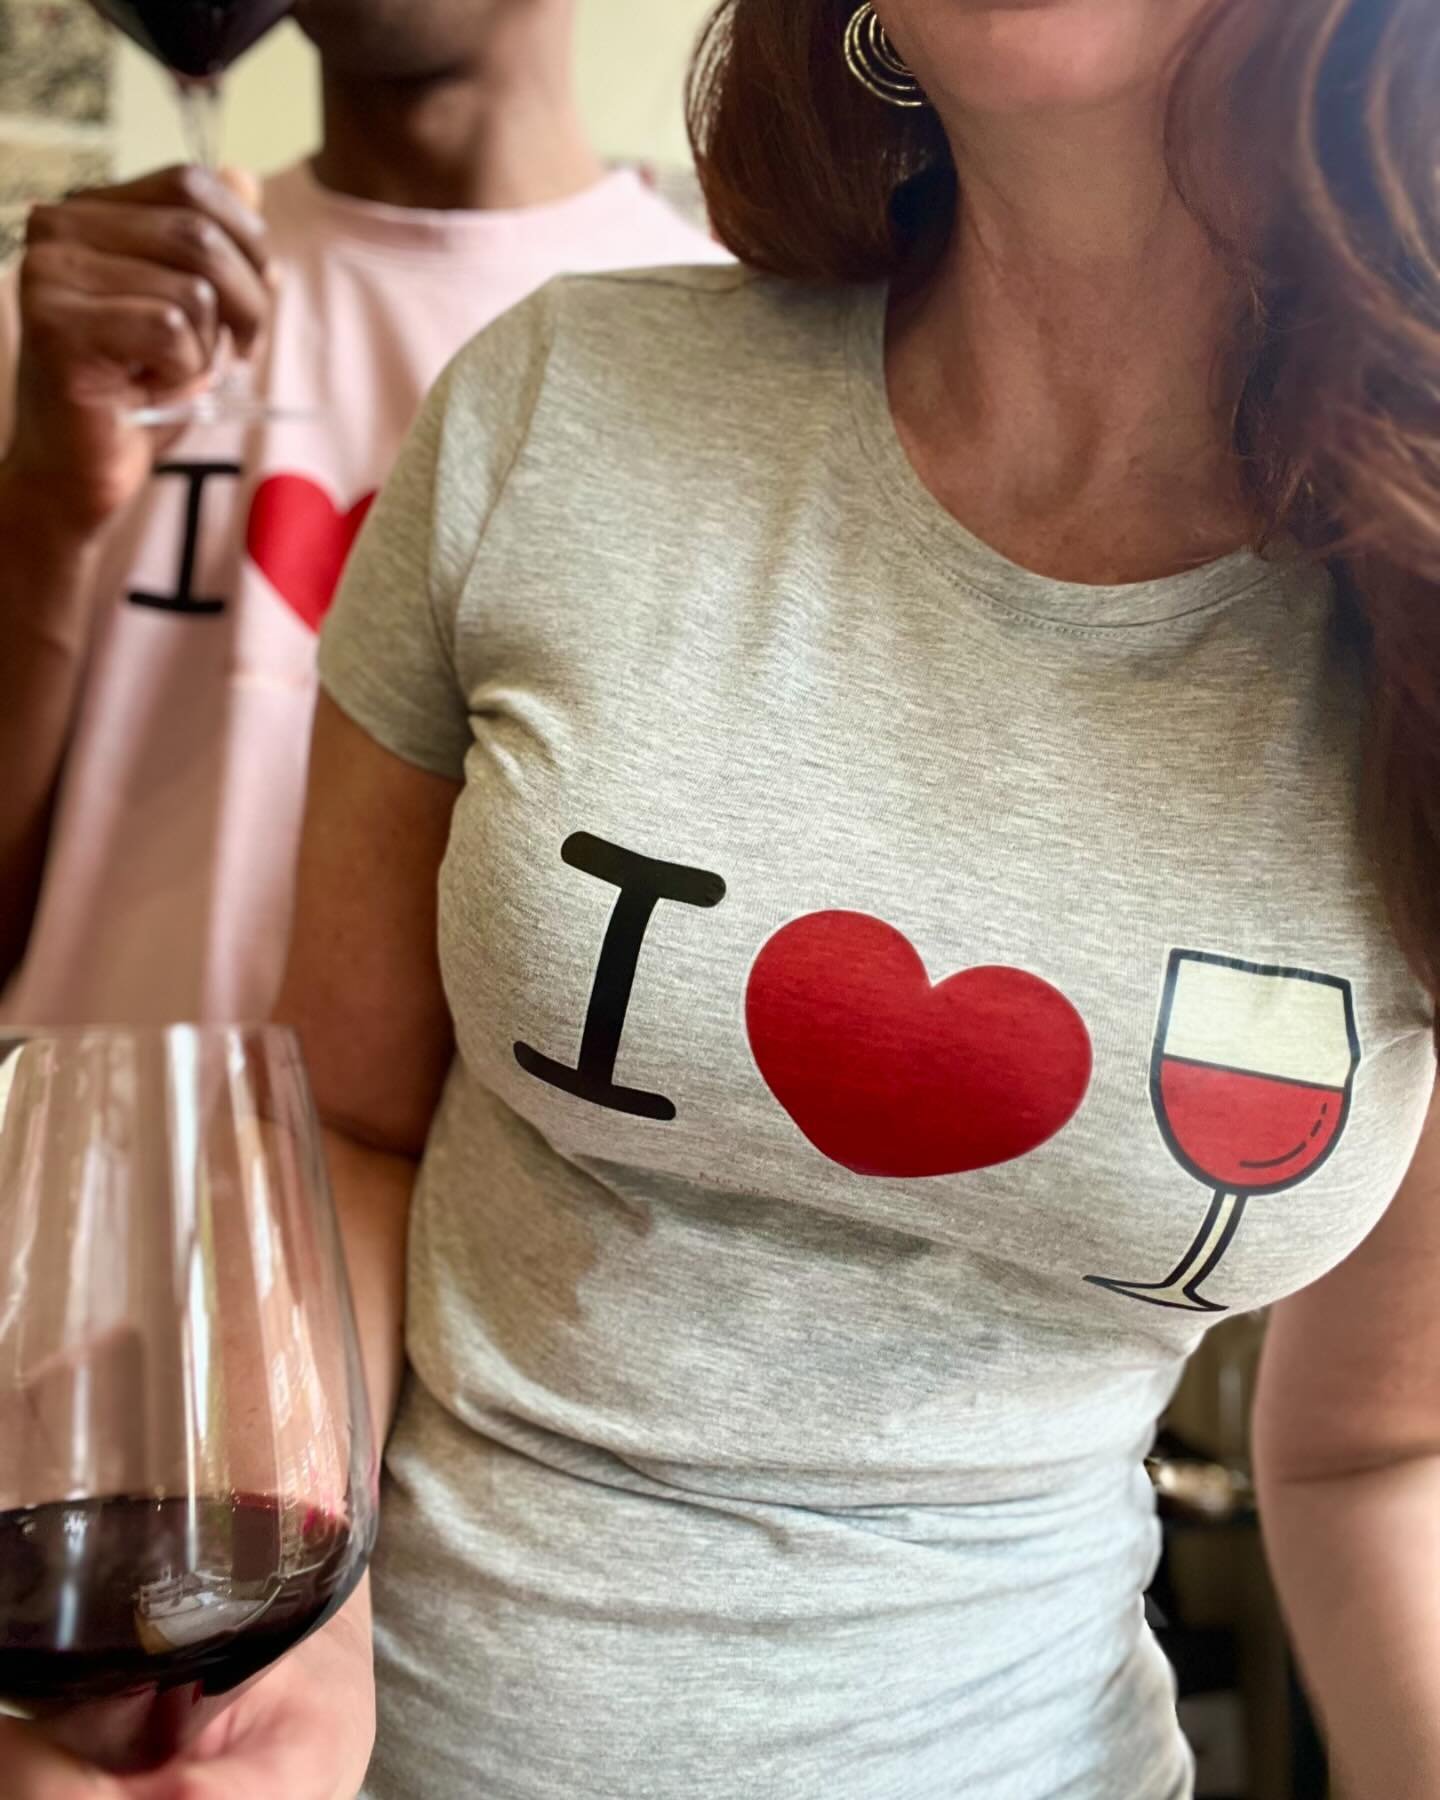 We ❤️ 🍷, how about you?